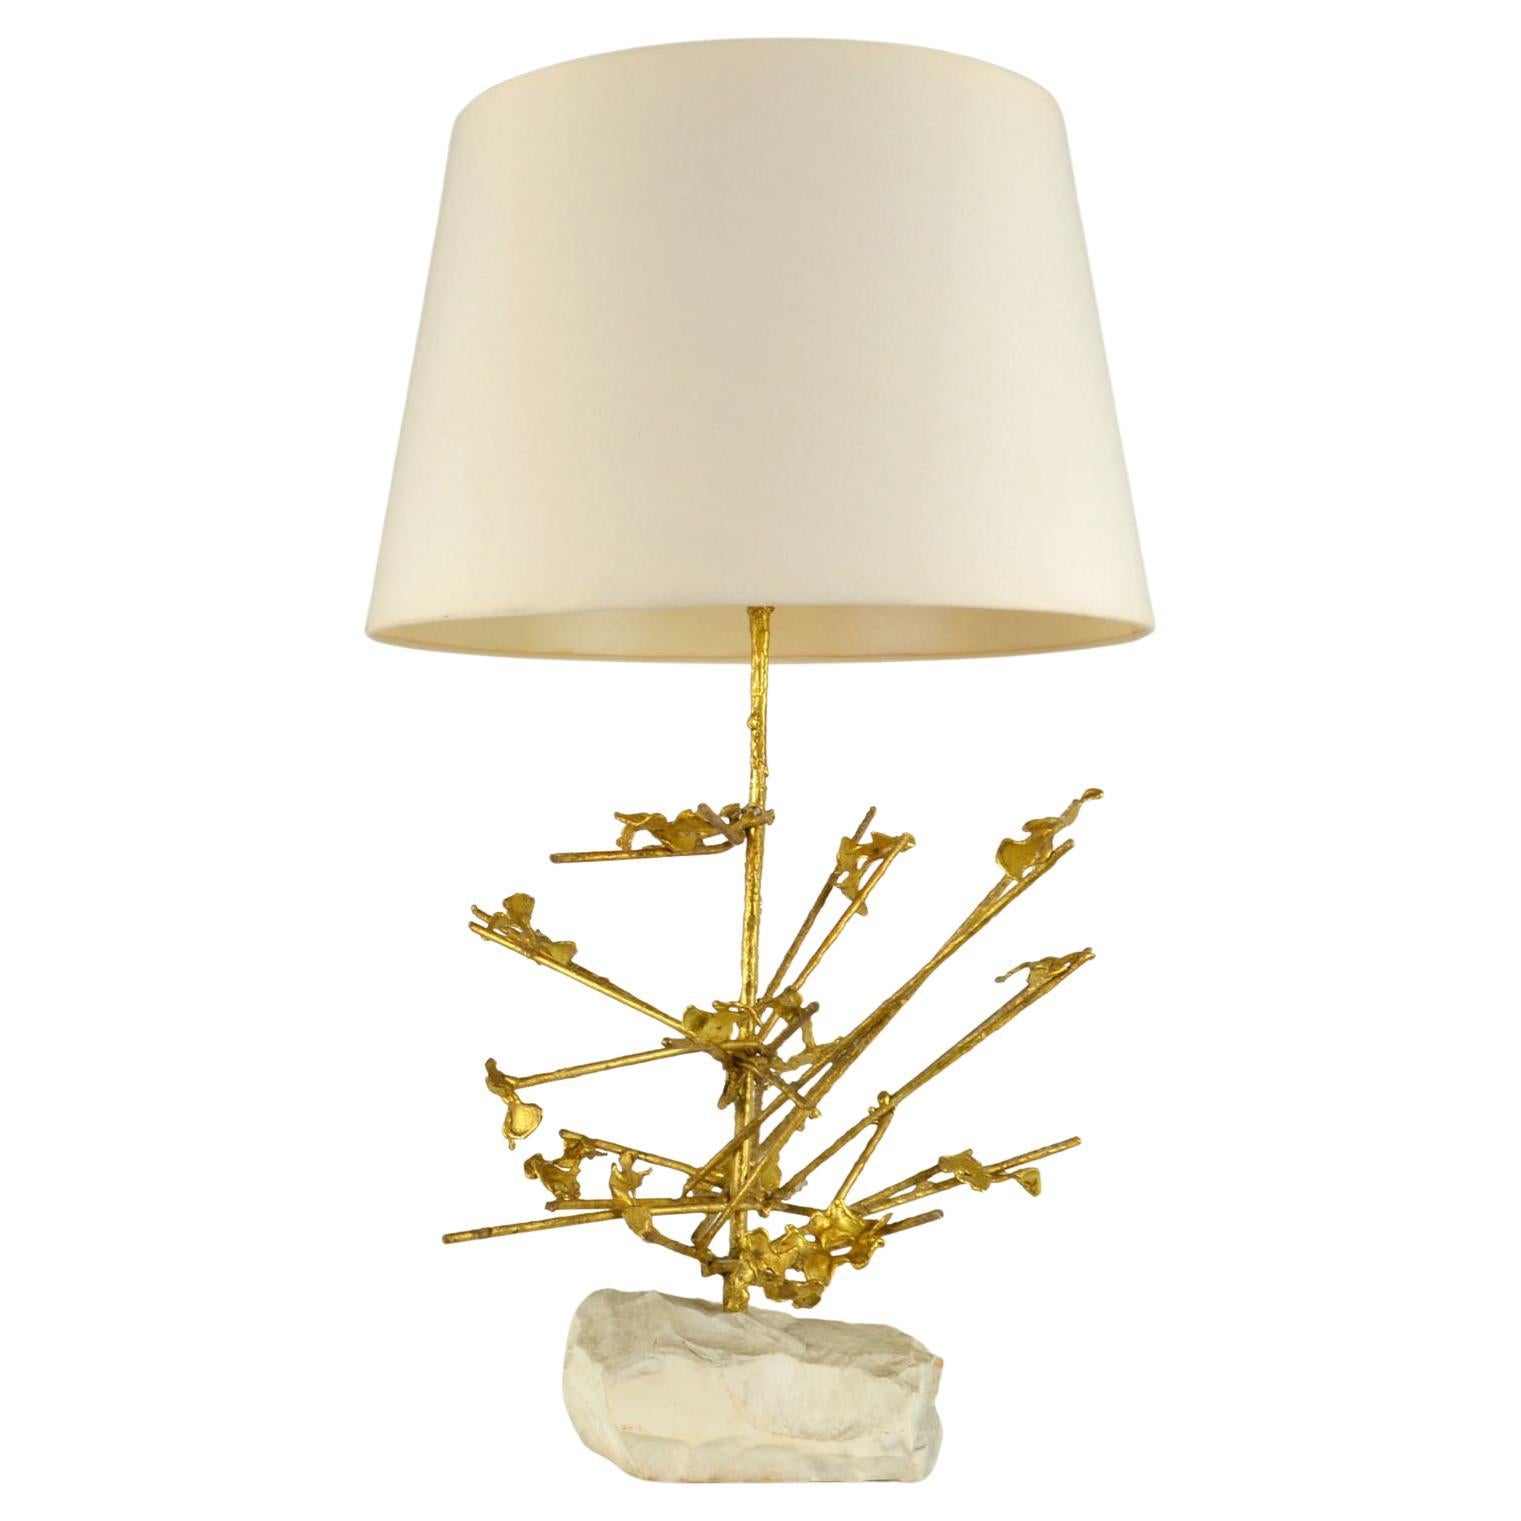 Sculptural Brass Art Table Lamp 1980's Belgium In Excellent Condition For Sale In London, GB